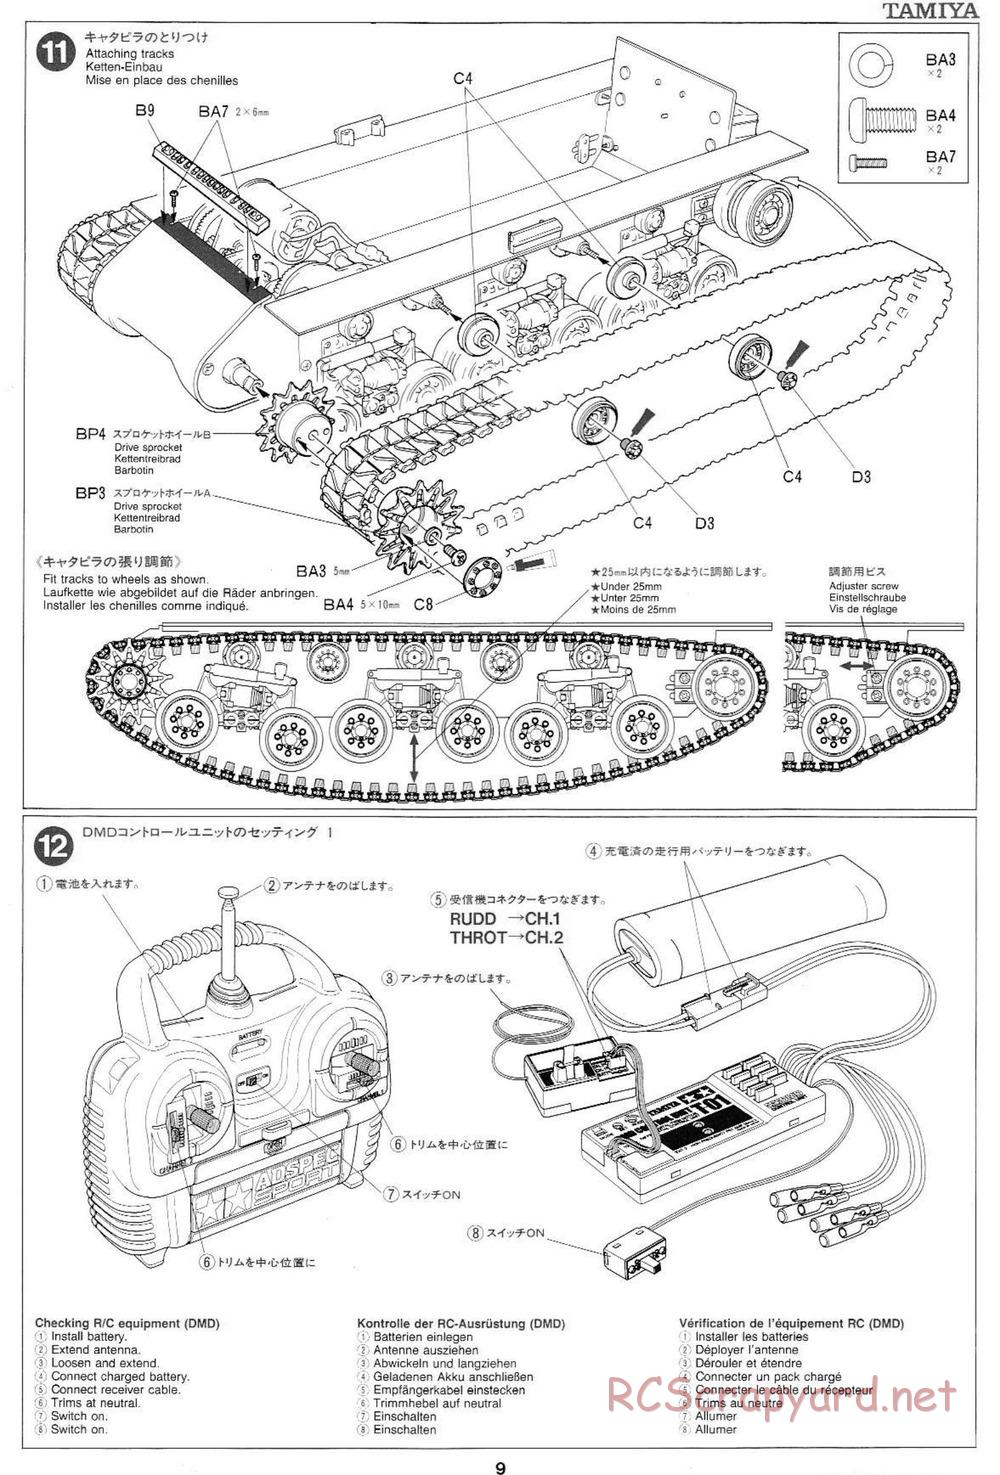 Tamiya - M4 Sherman 105mm Howitzer - 1/16 Scale Chassis - Manual - Page 9